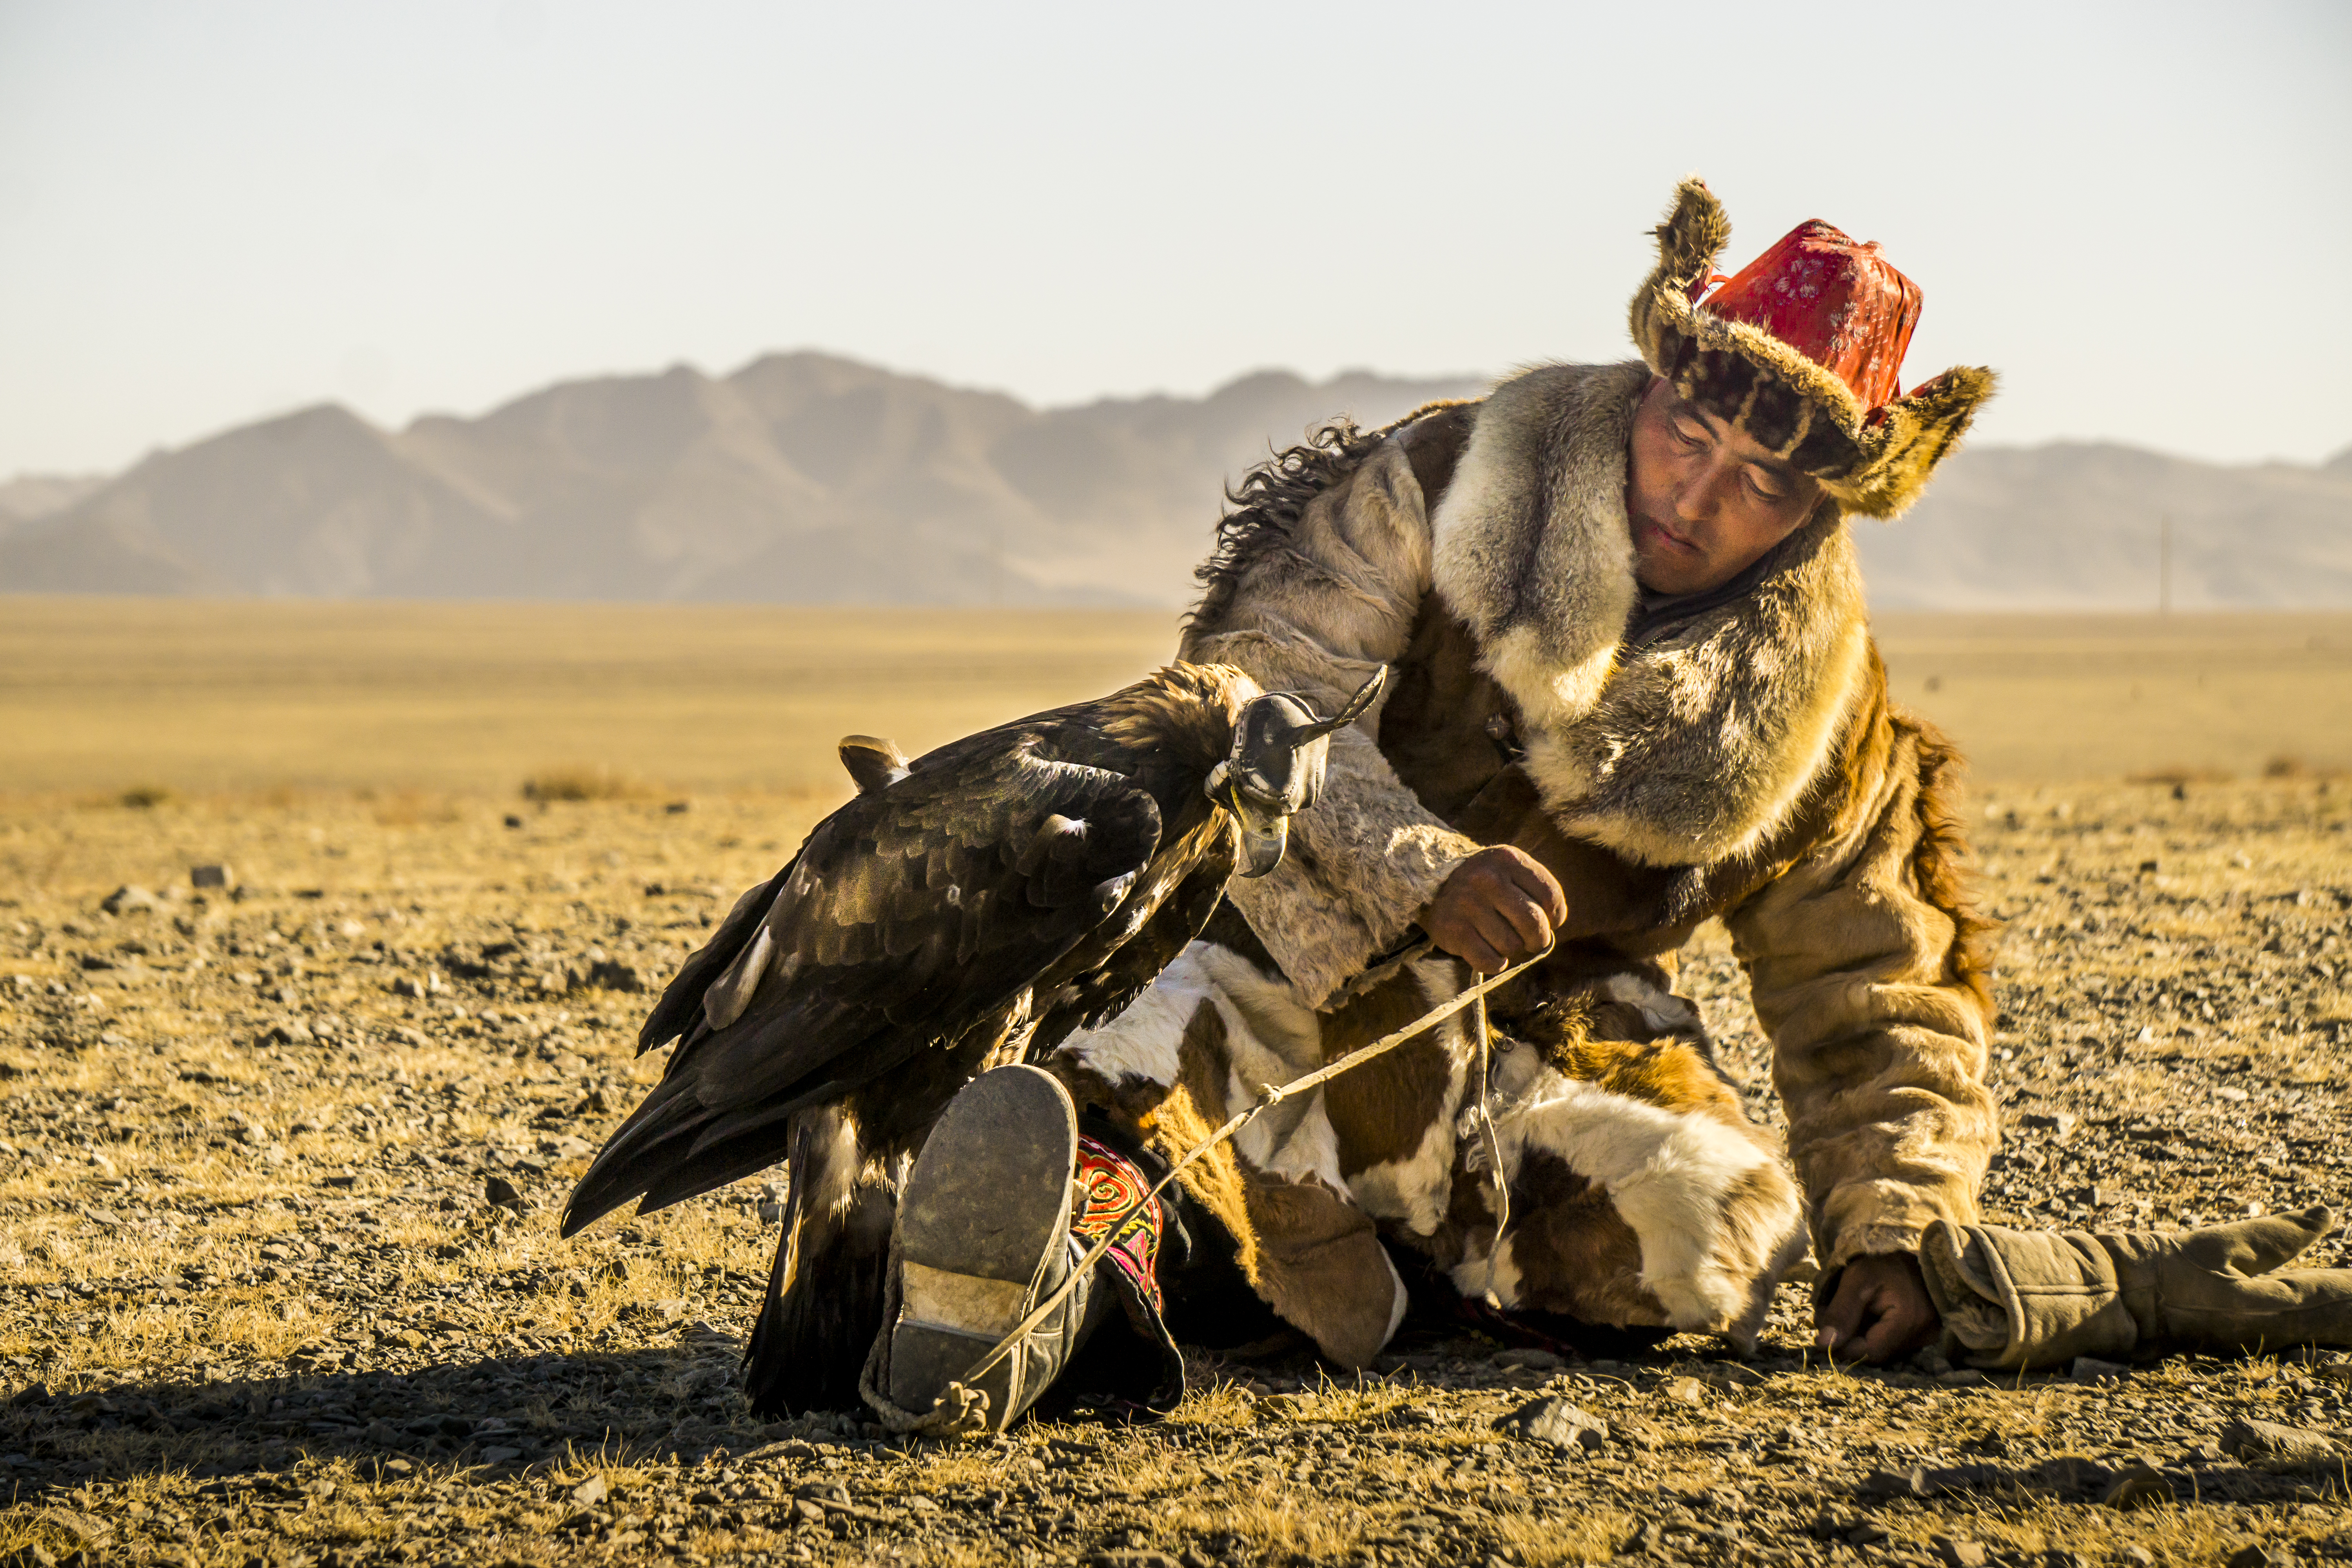 A Mongolian man inspects his golden eagle (Aquila chrysaetos) before competing in an eagle hunting contest in northern Mongolia